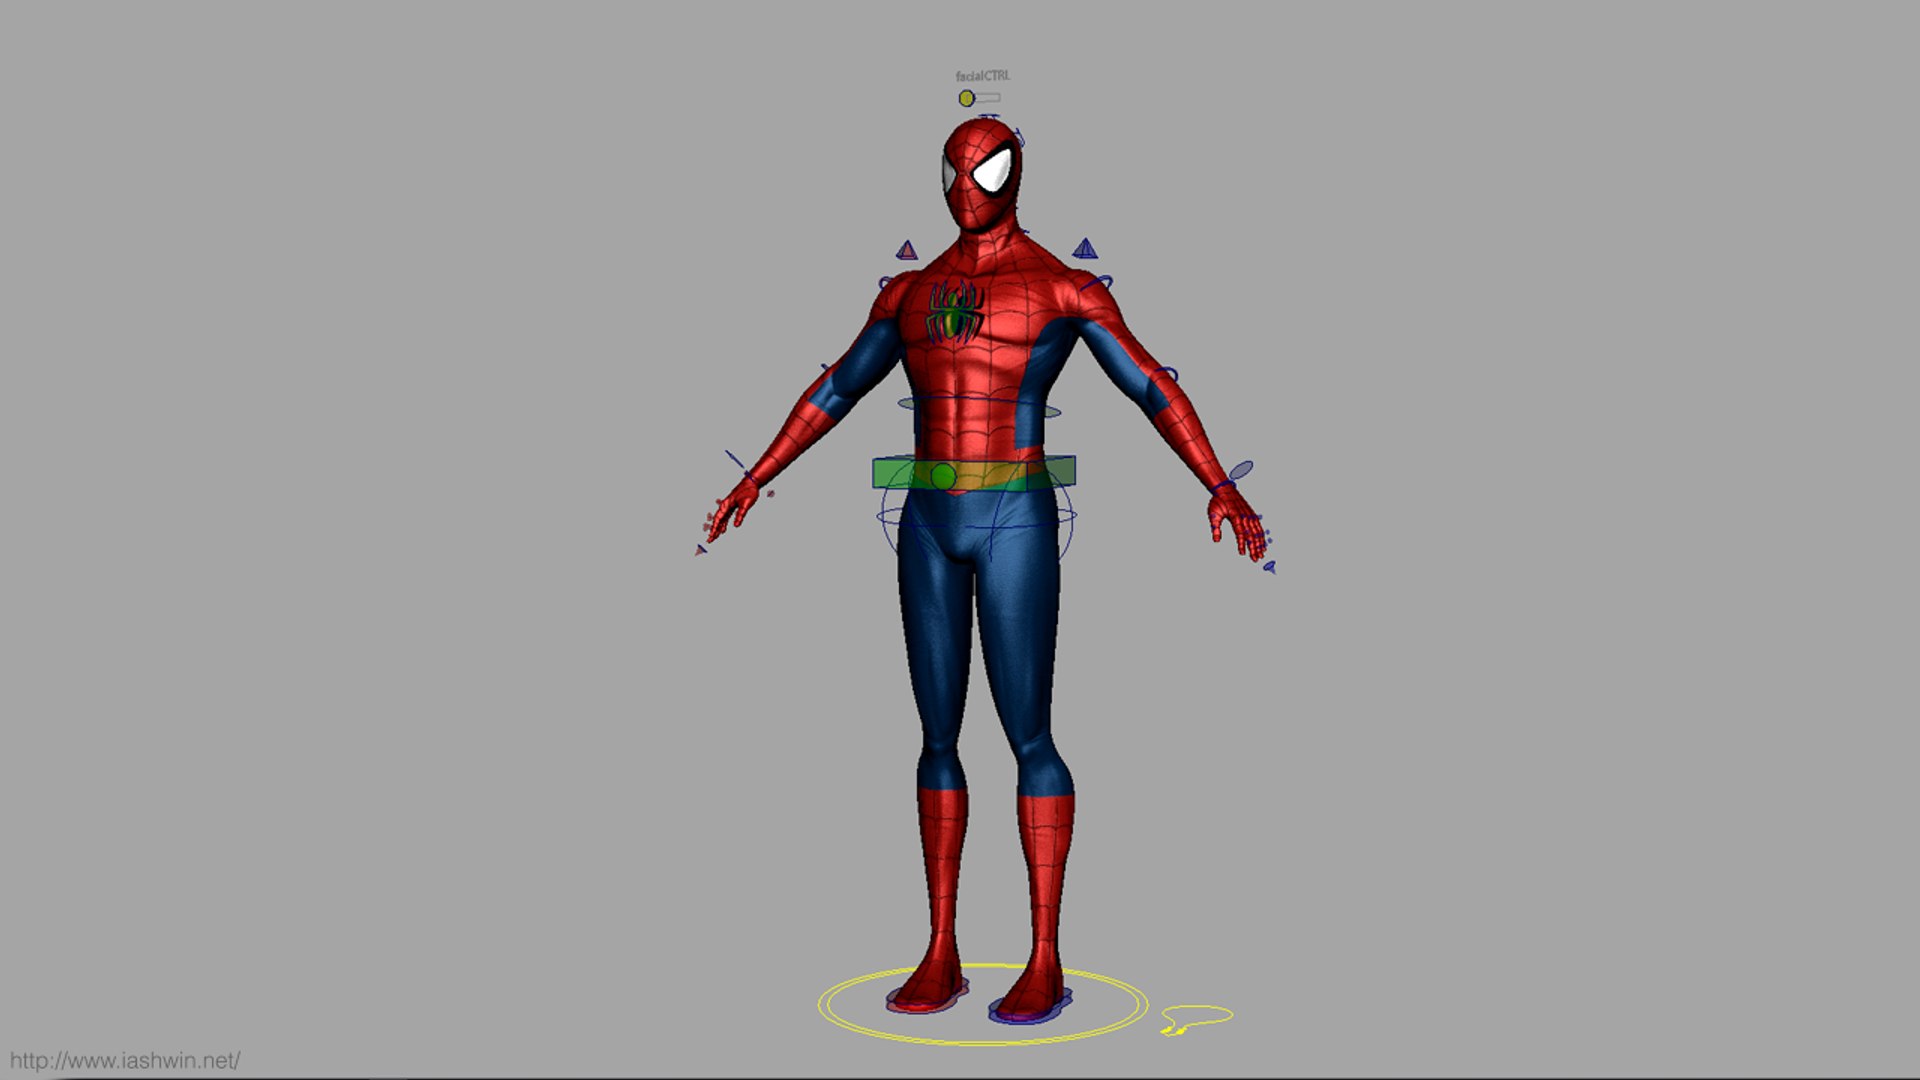 3d model of spider-man rig character